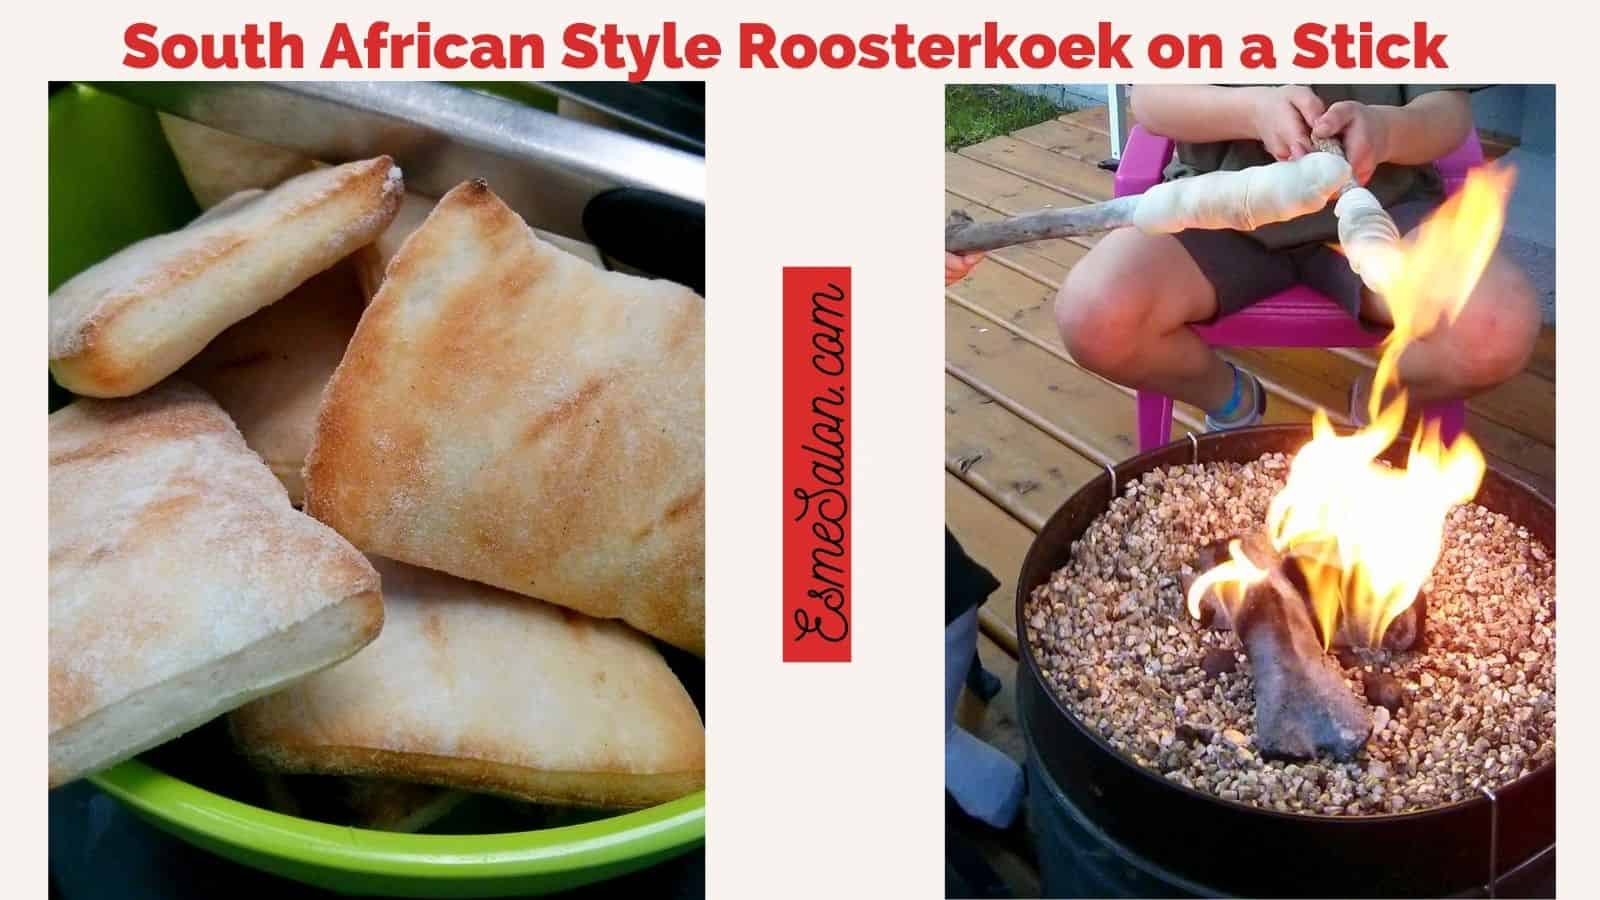 SA roosterkoek, aka bread on a stick made on an open fire